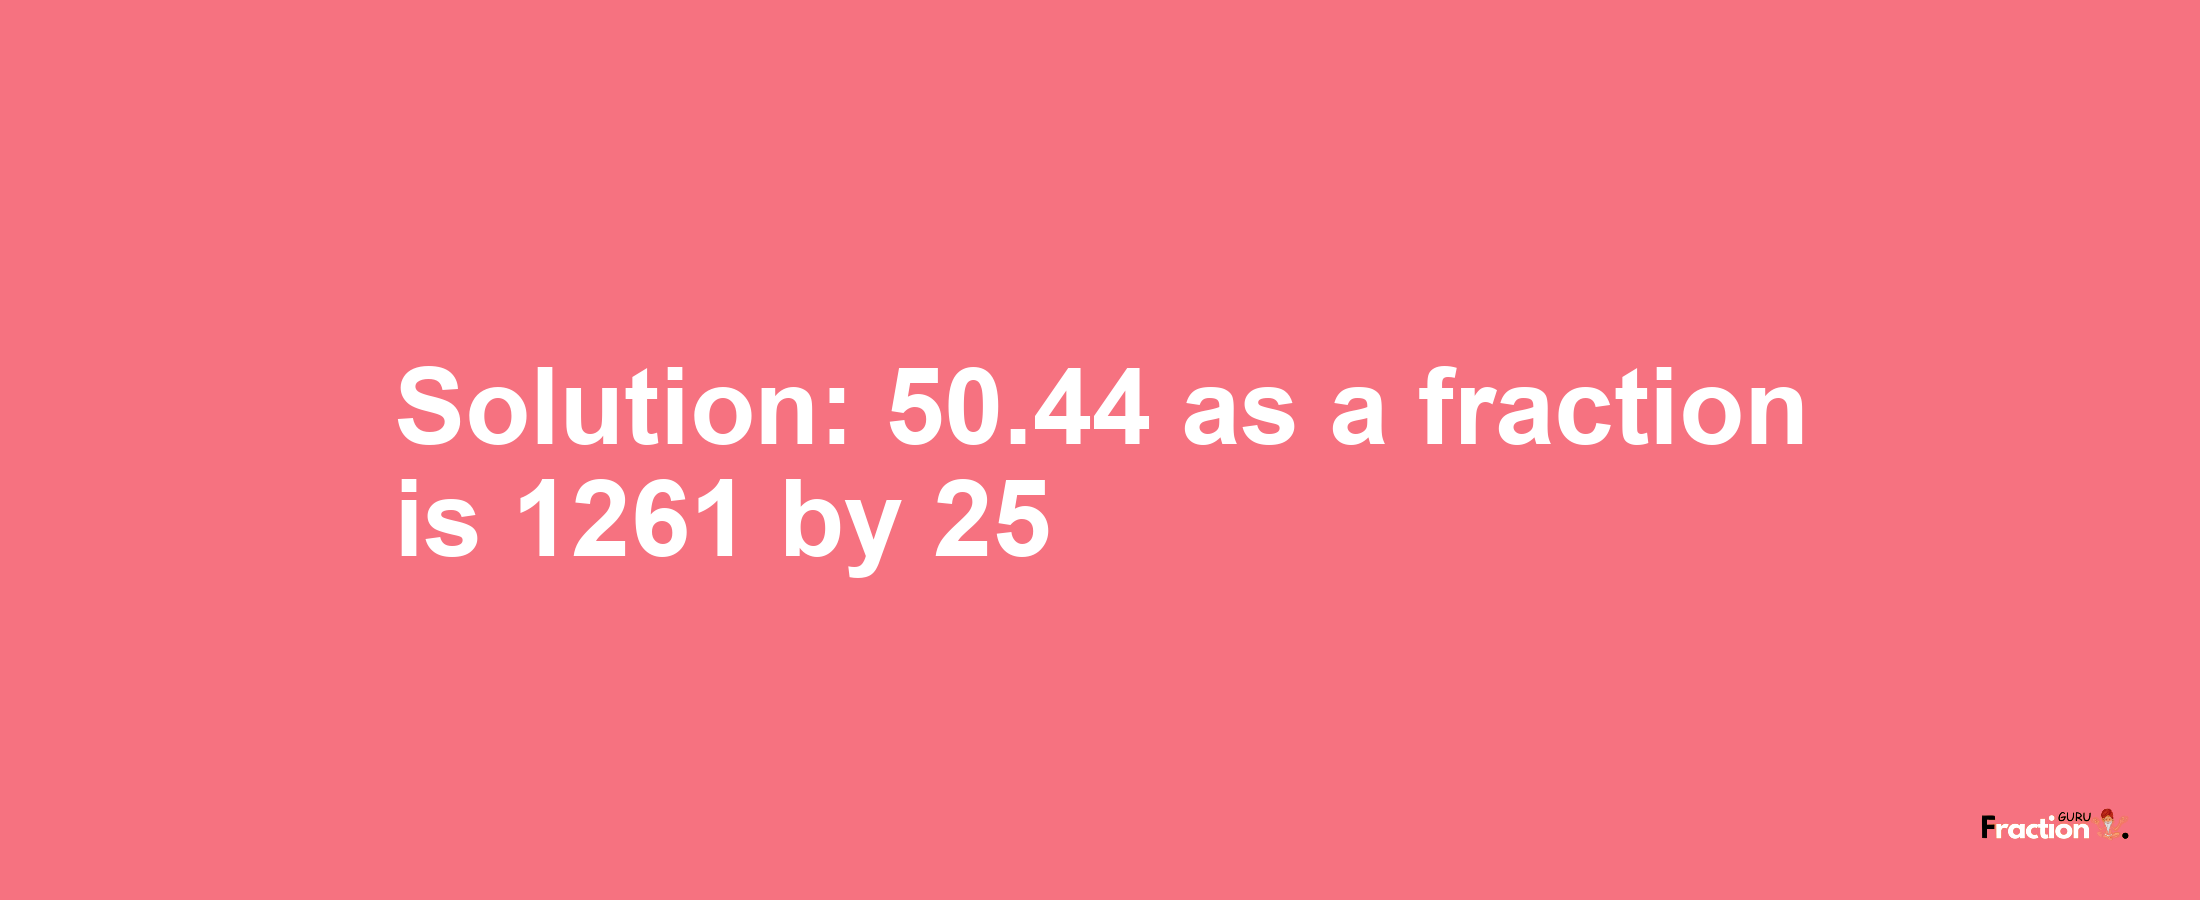 Solution:50.44 as a fraction is 1261/25